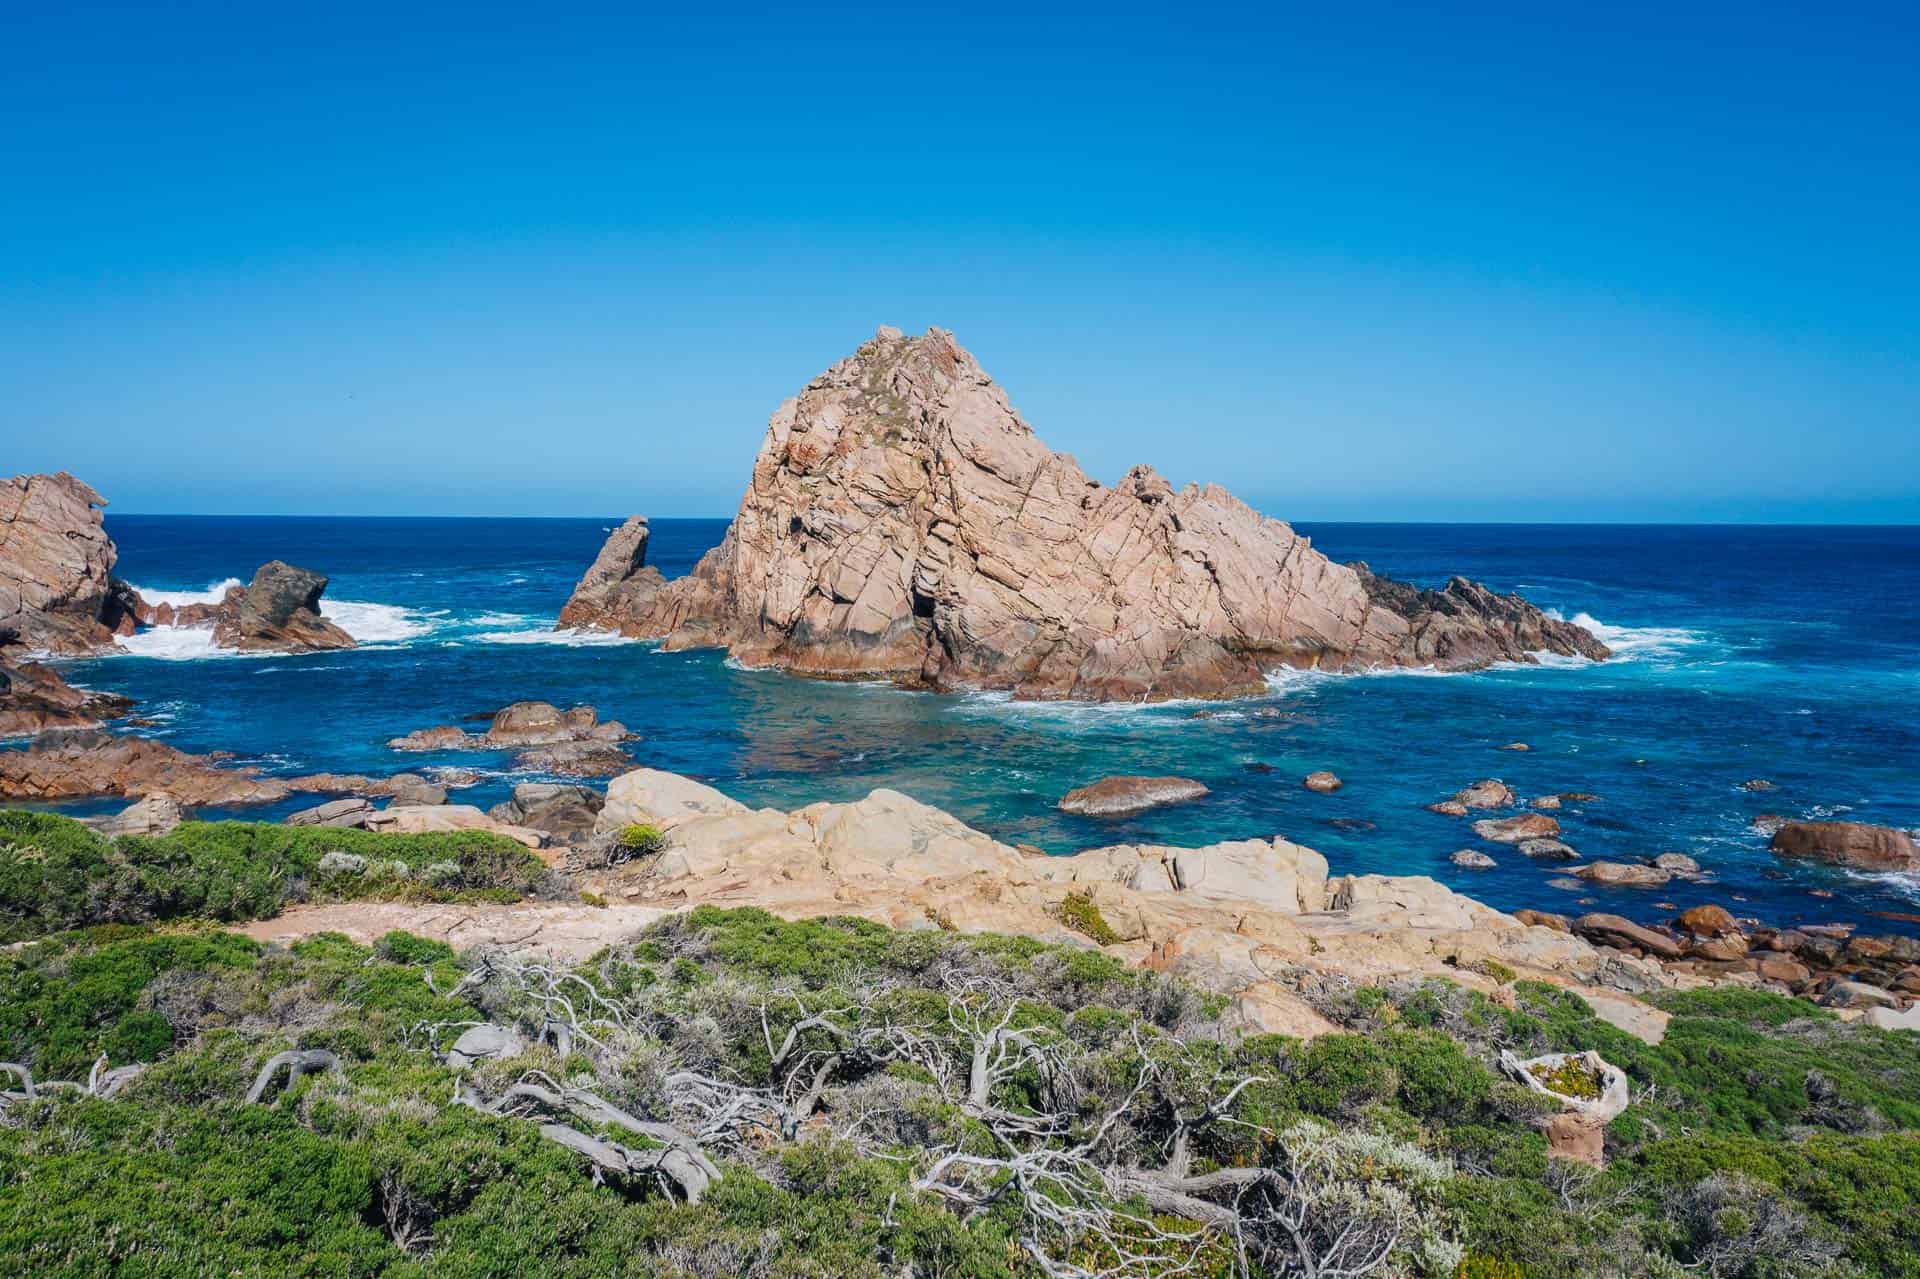 things to do in margaret river, what to do in margaret river, best things to do in margaret river, things to do margaret river, sugarloaf rock